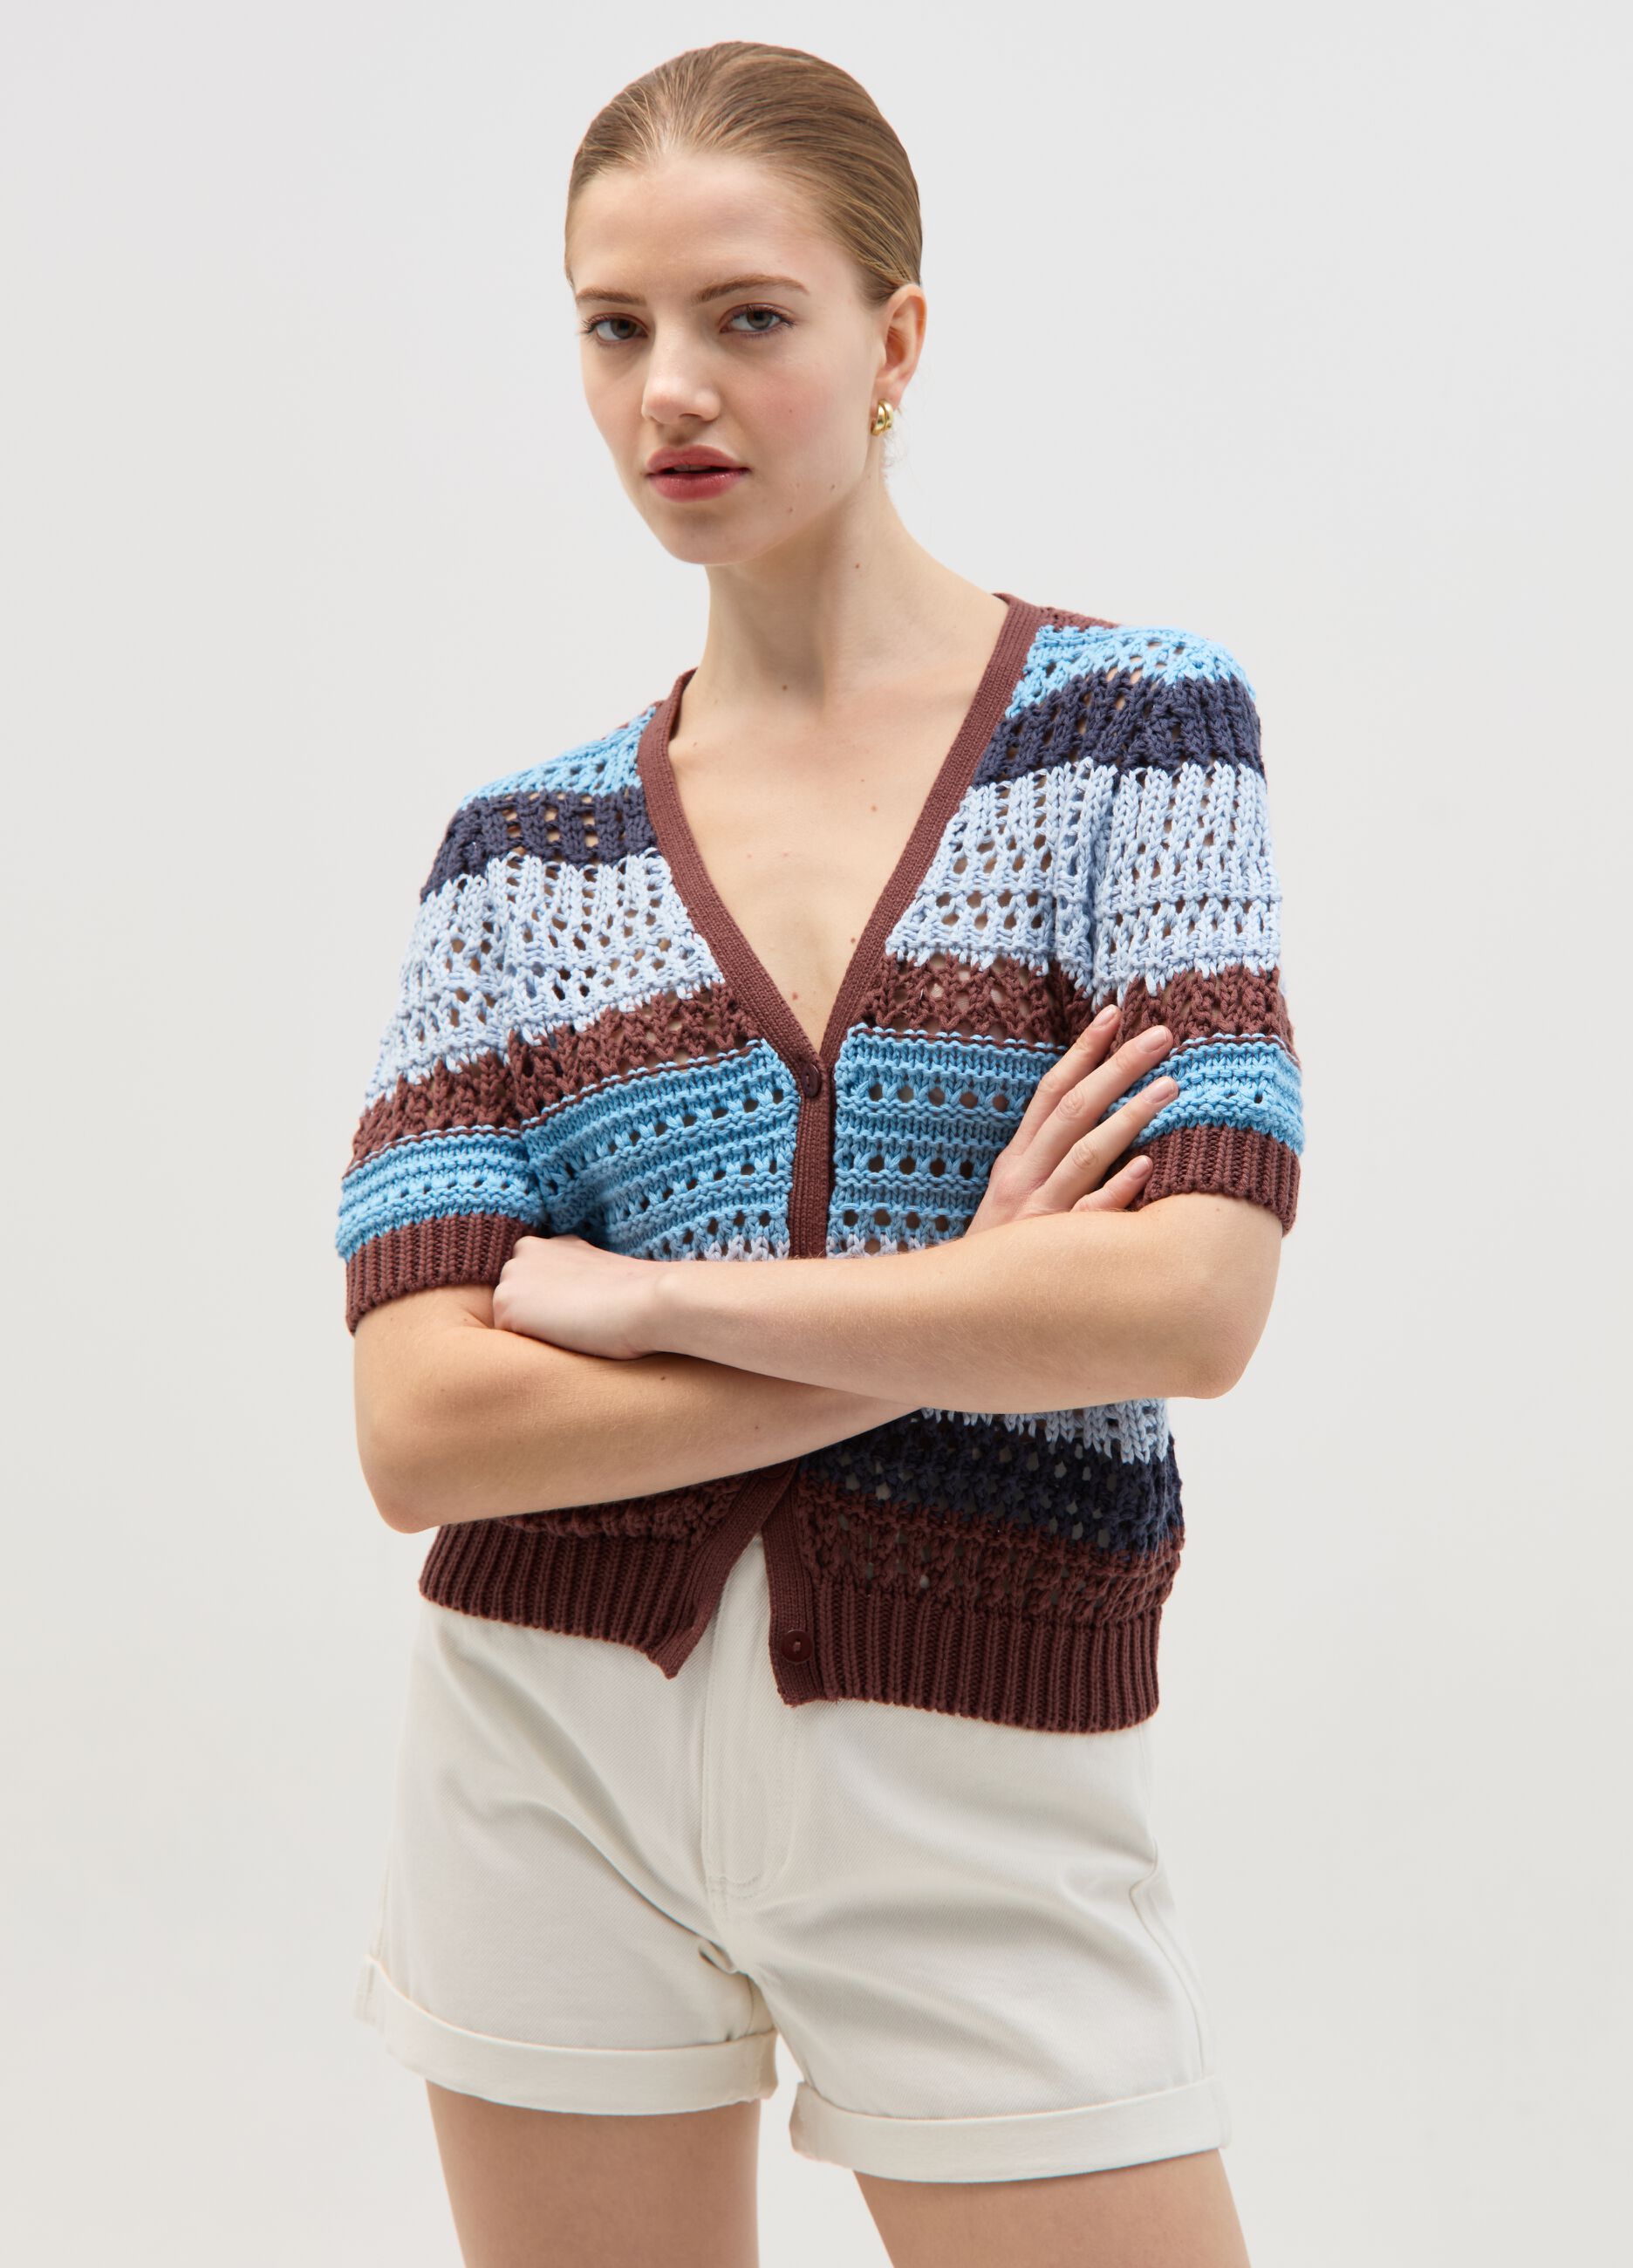 Striped crochet cardigan with short sleeves